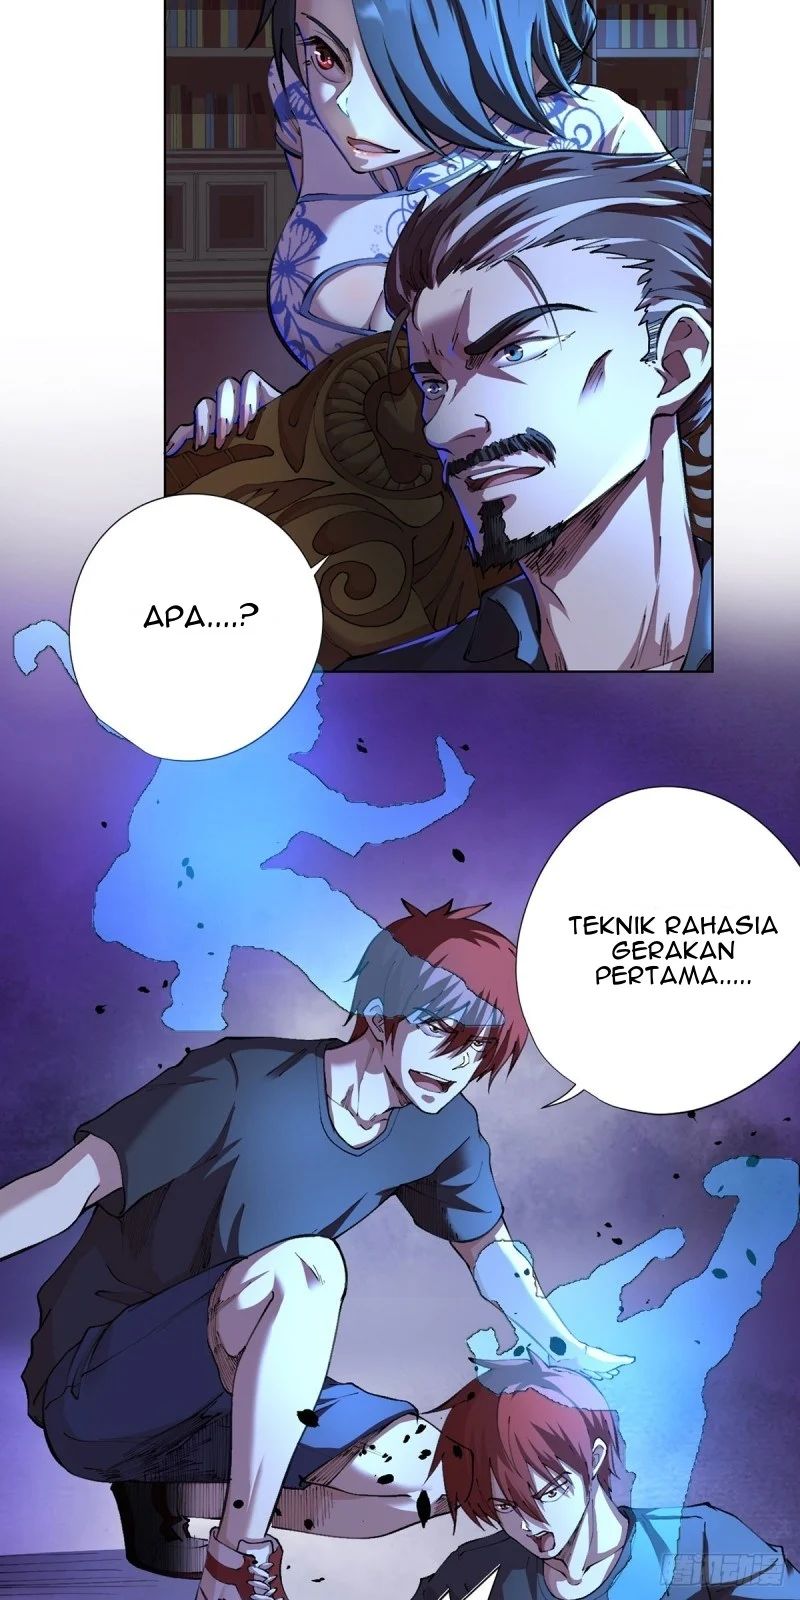 Ace God Doctor Chapter 13